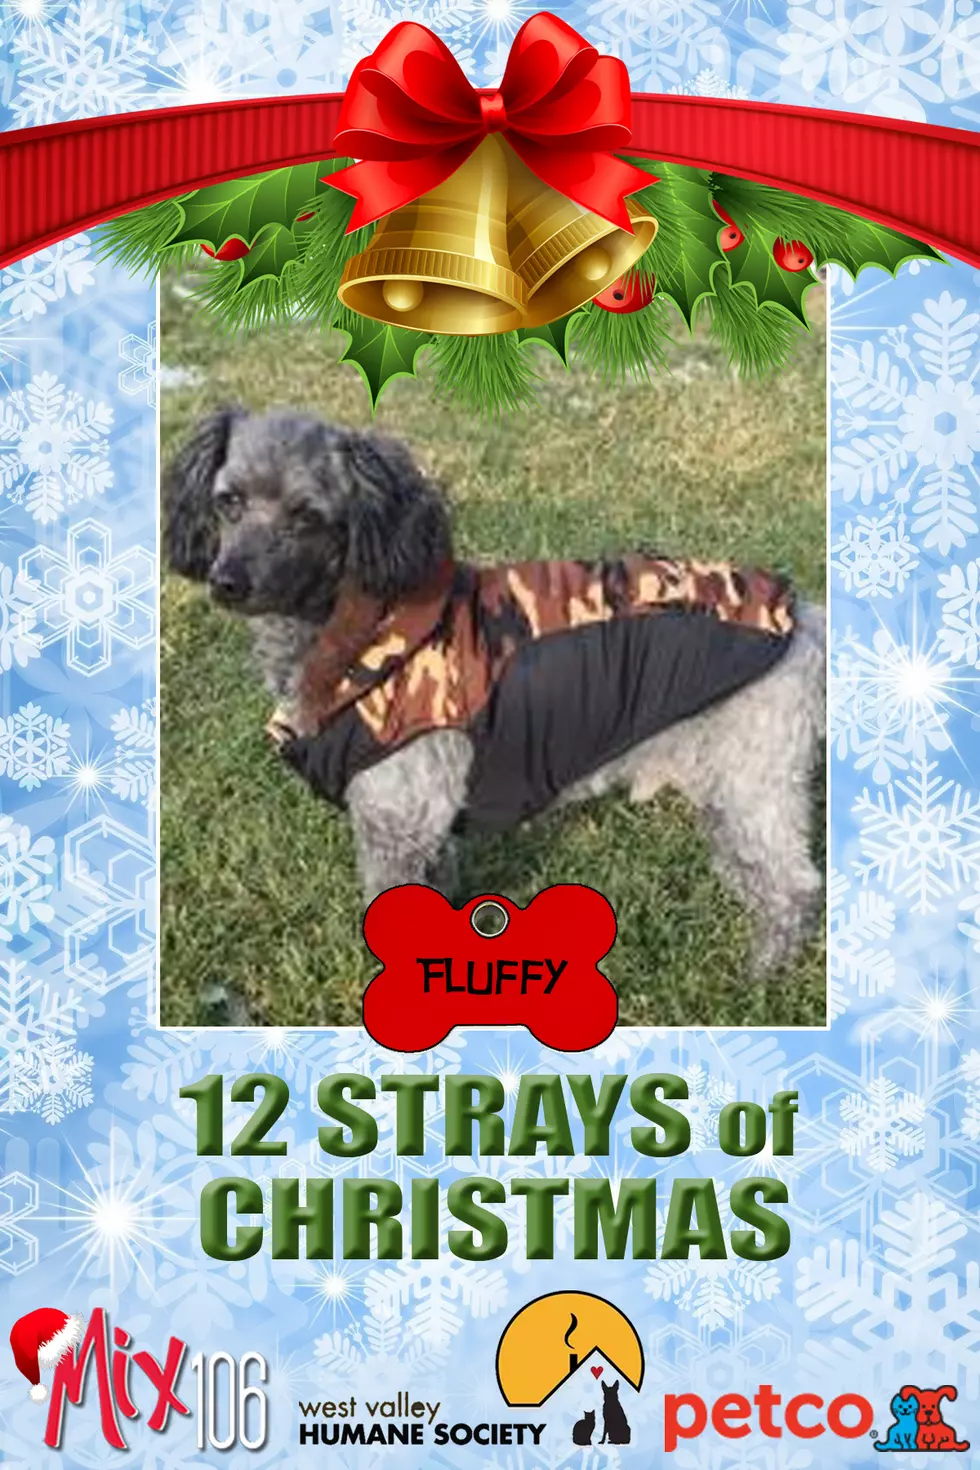 #7 of The 12 Strays of Christmas – Fluffy